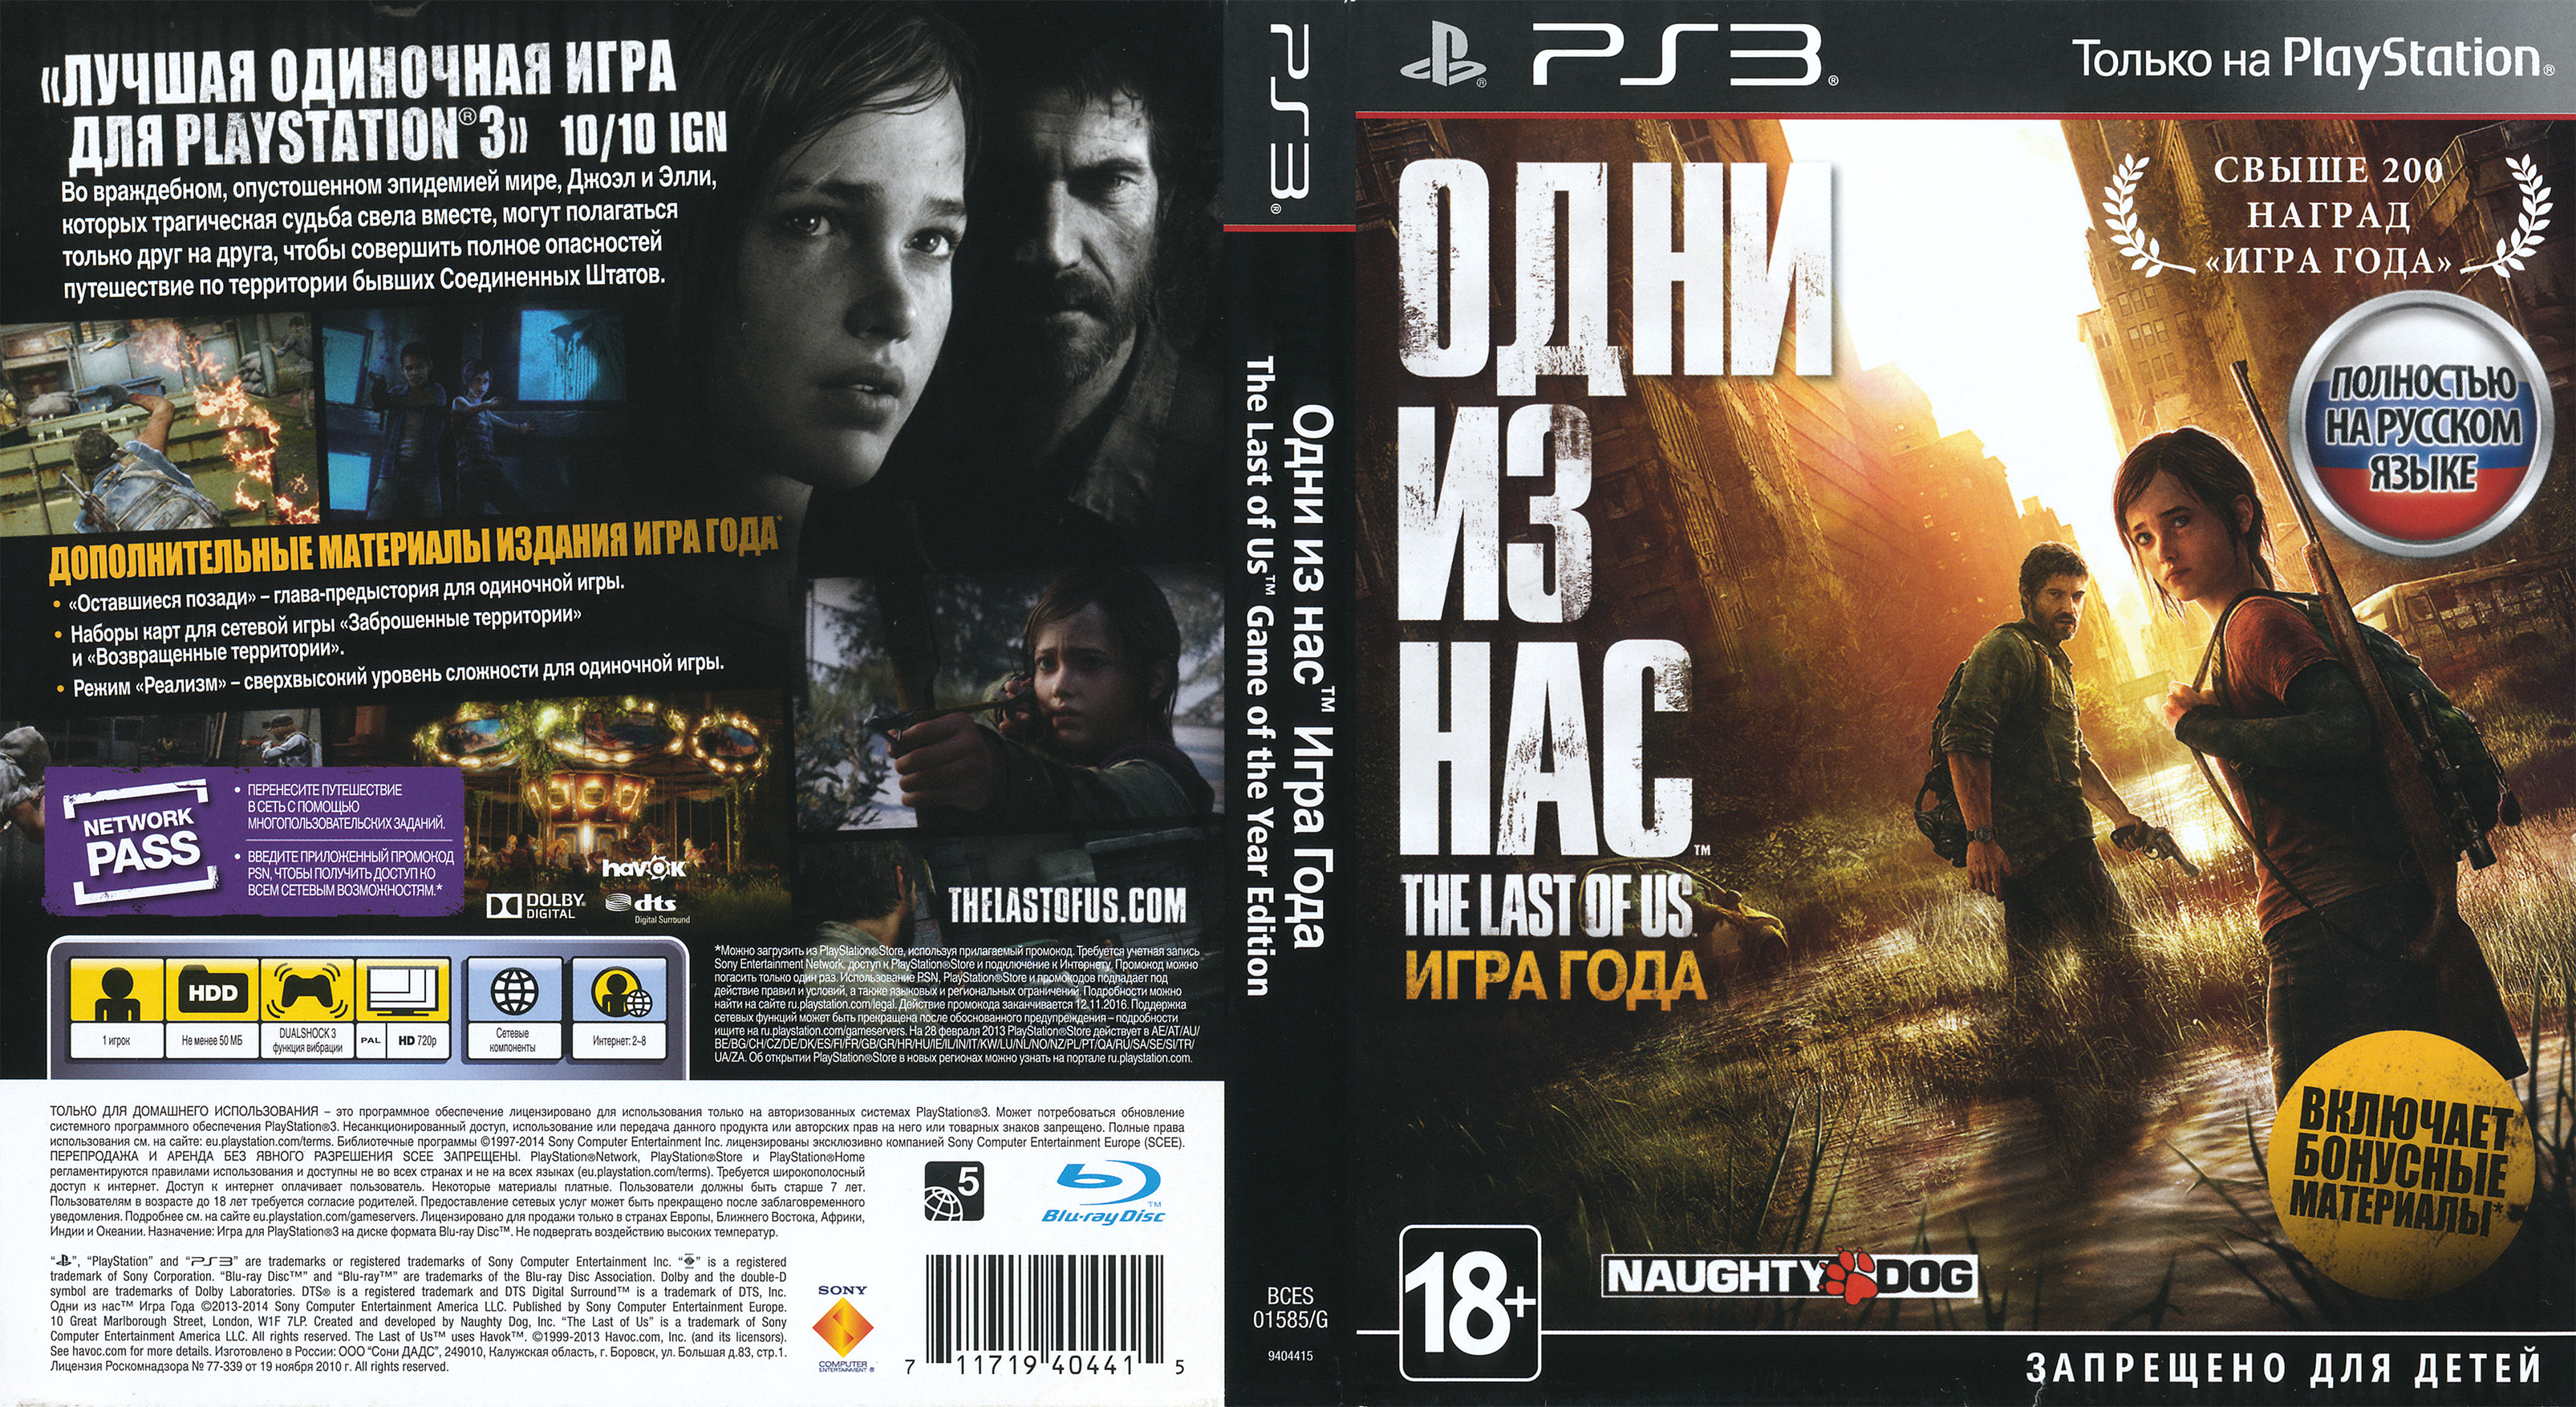 papelería Estragos quemar The Last of Us (Game of the Year Edition) PS3 BCES-01585/G/RSC Russia —  Complete Art Scans : Free Download, Borrow, and Streaming : Internet Archive